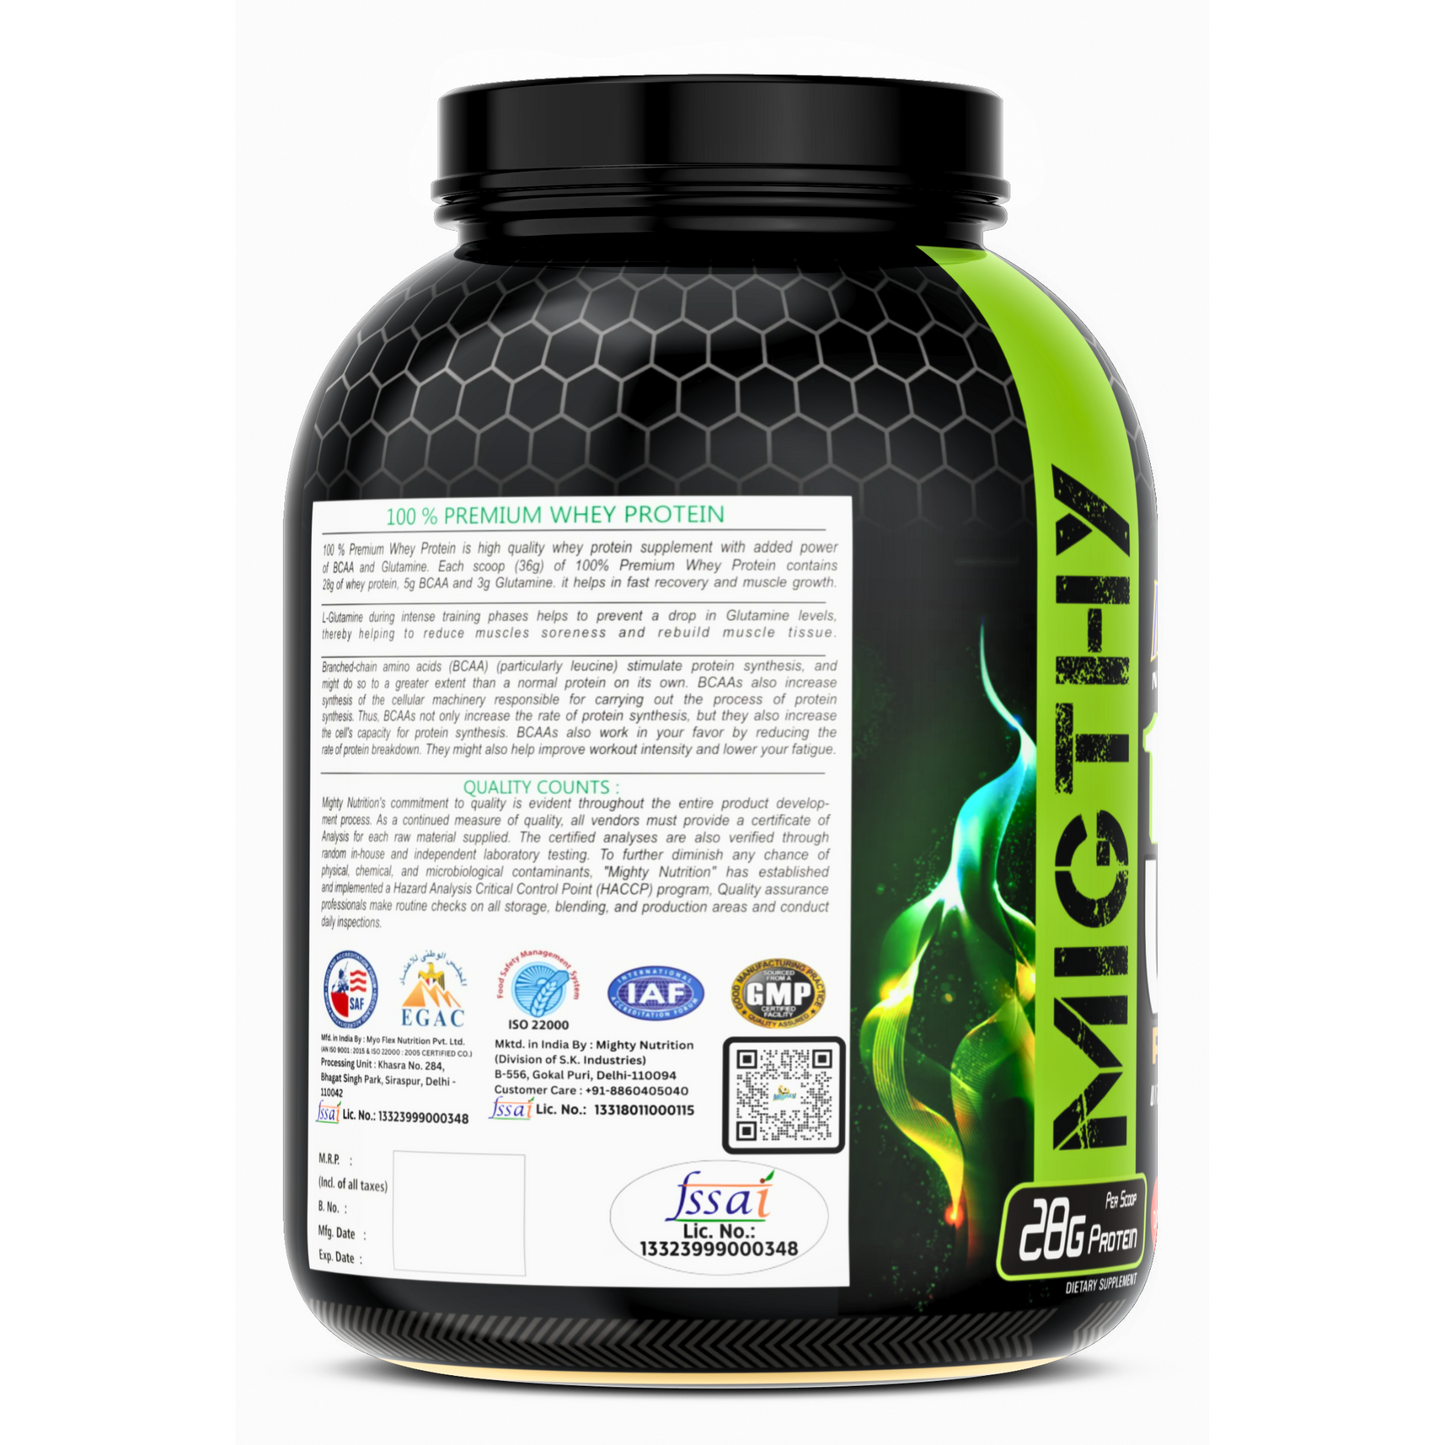 A powerful 5lbs container of mighty nutrition premium whey protein, perfect for building muscle mass and recovery. Left side